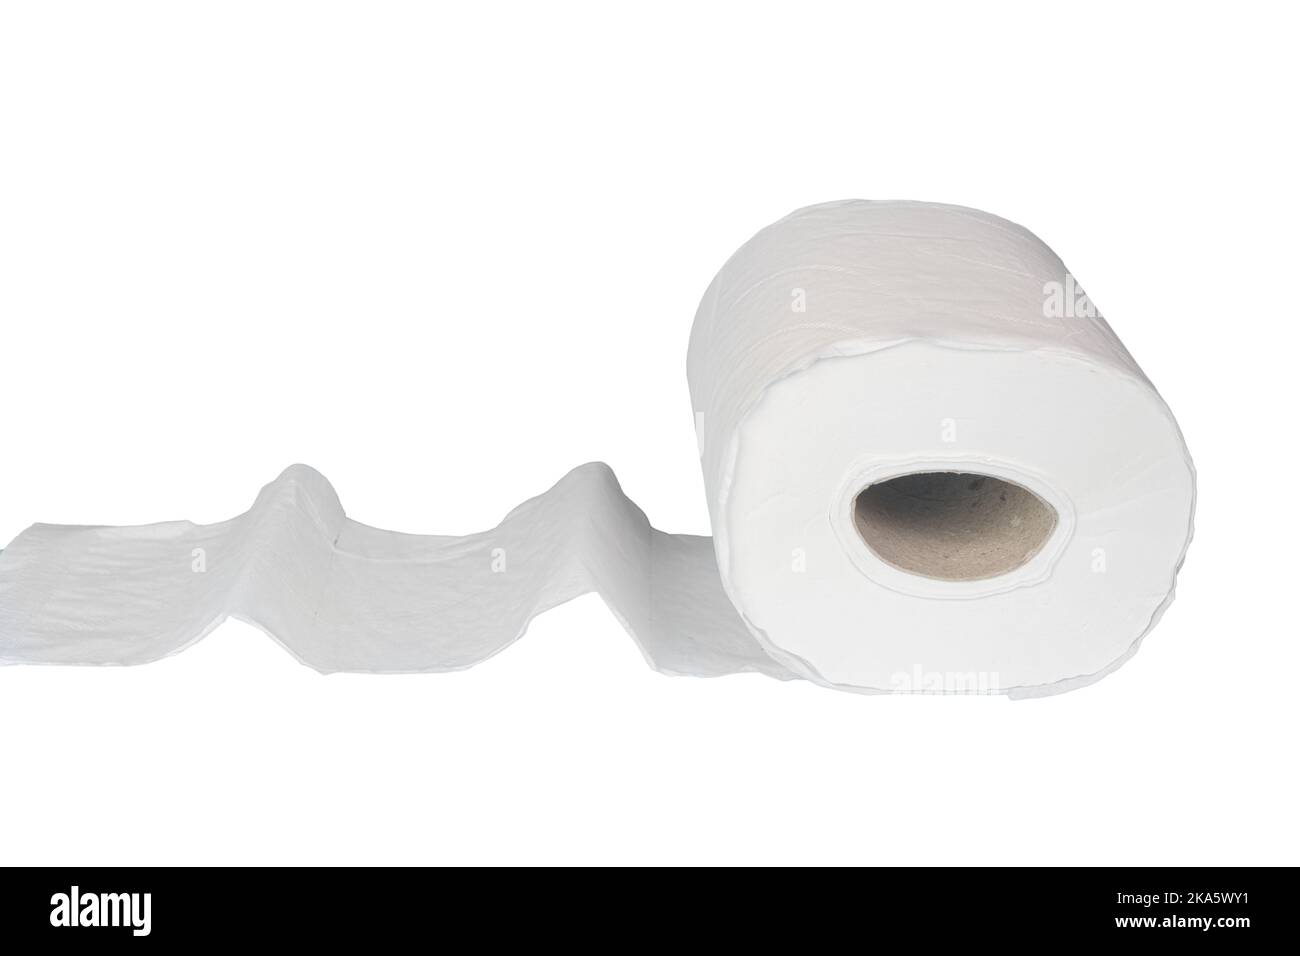 A toilet paper roll in a transparent background Stock Photo - Alamy